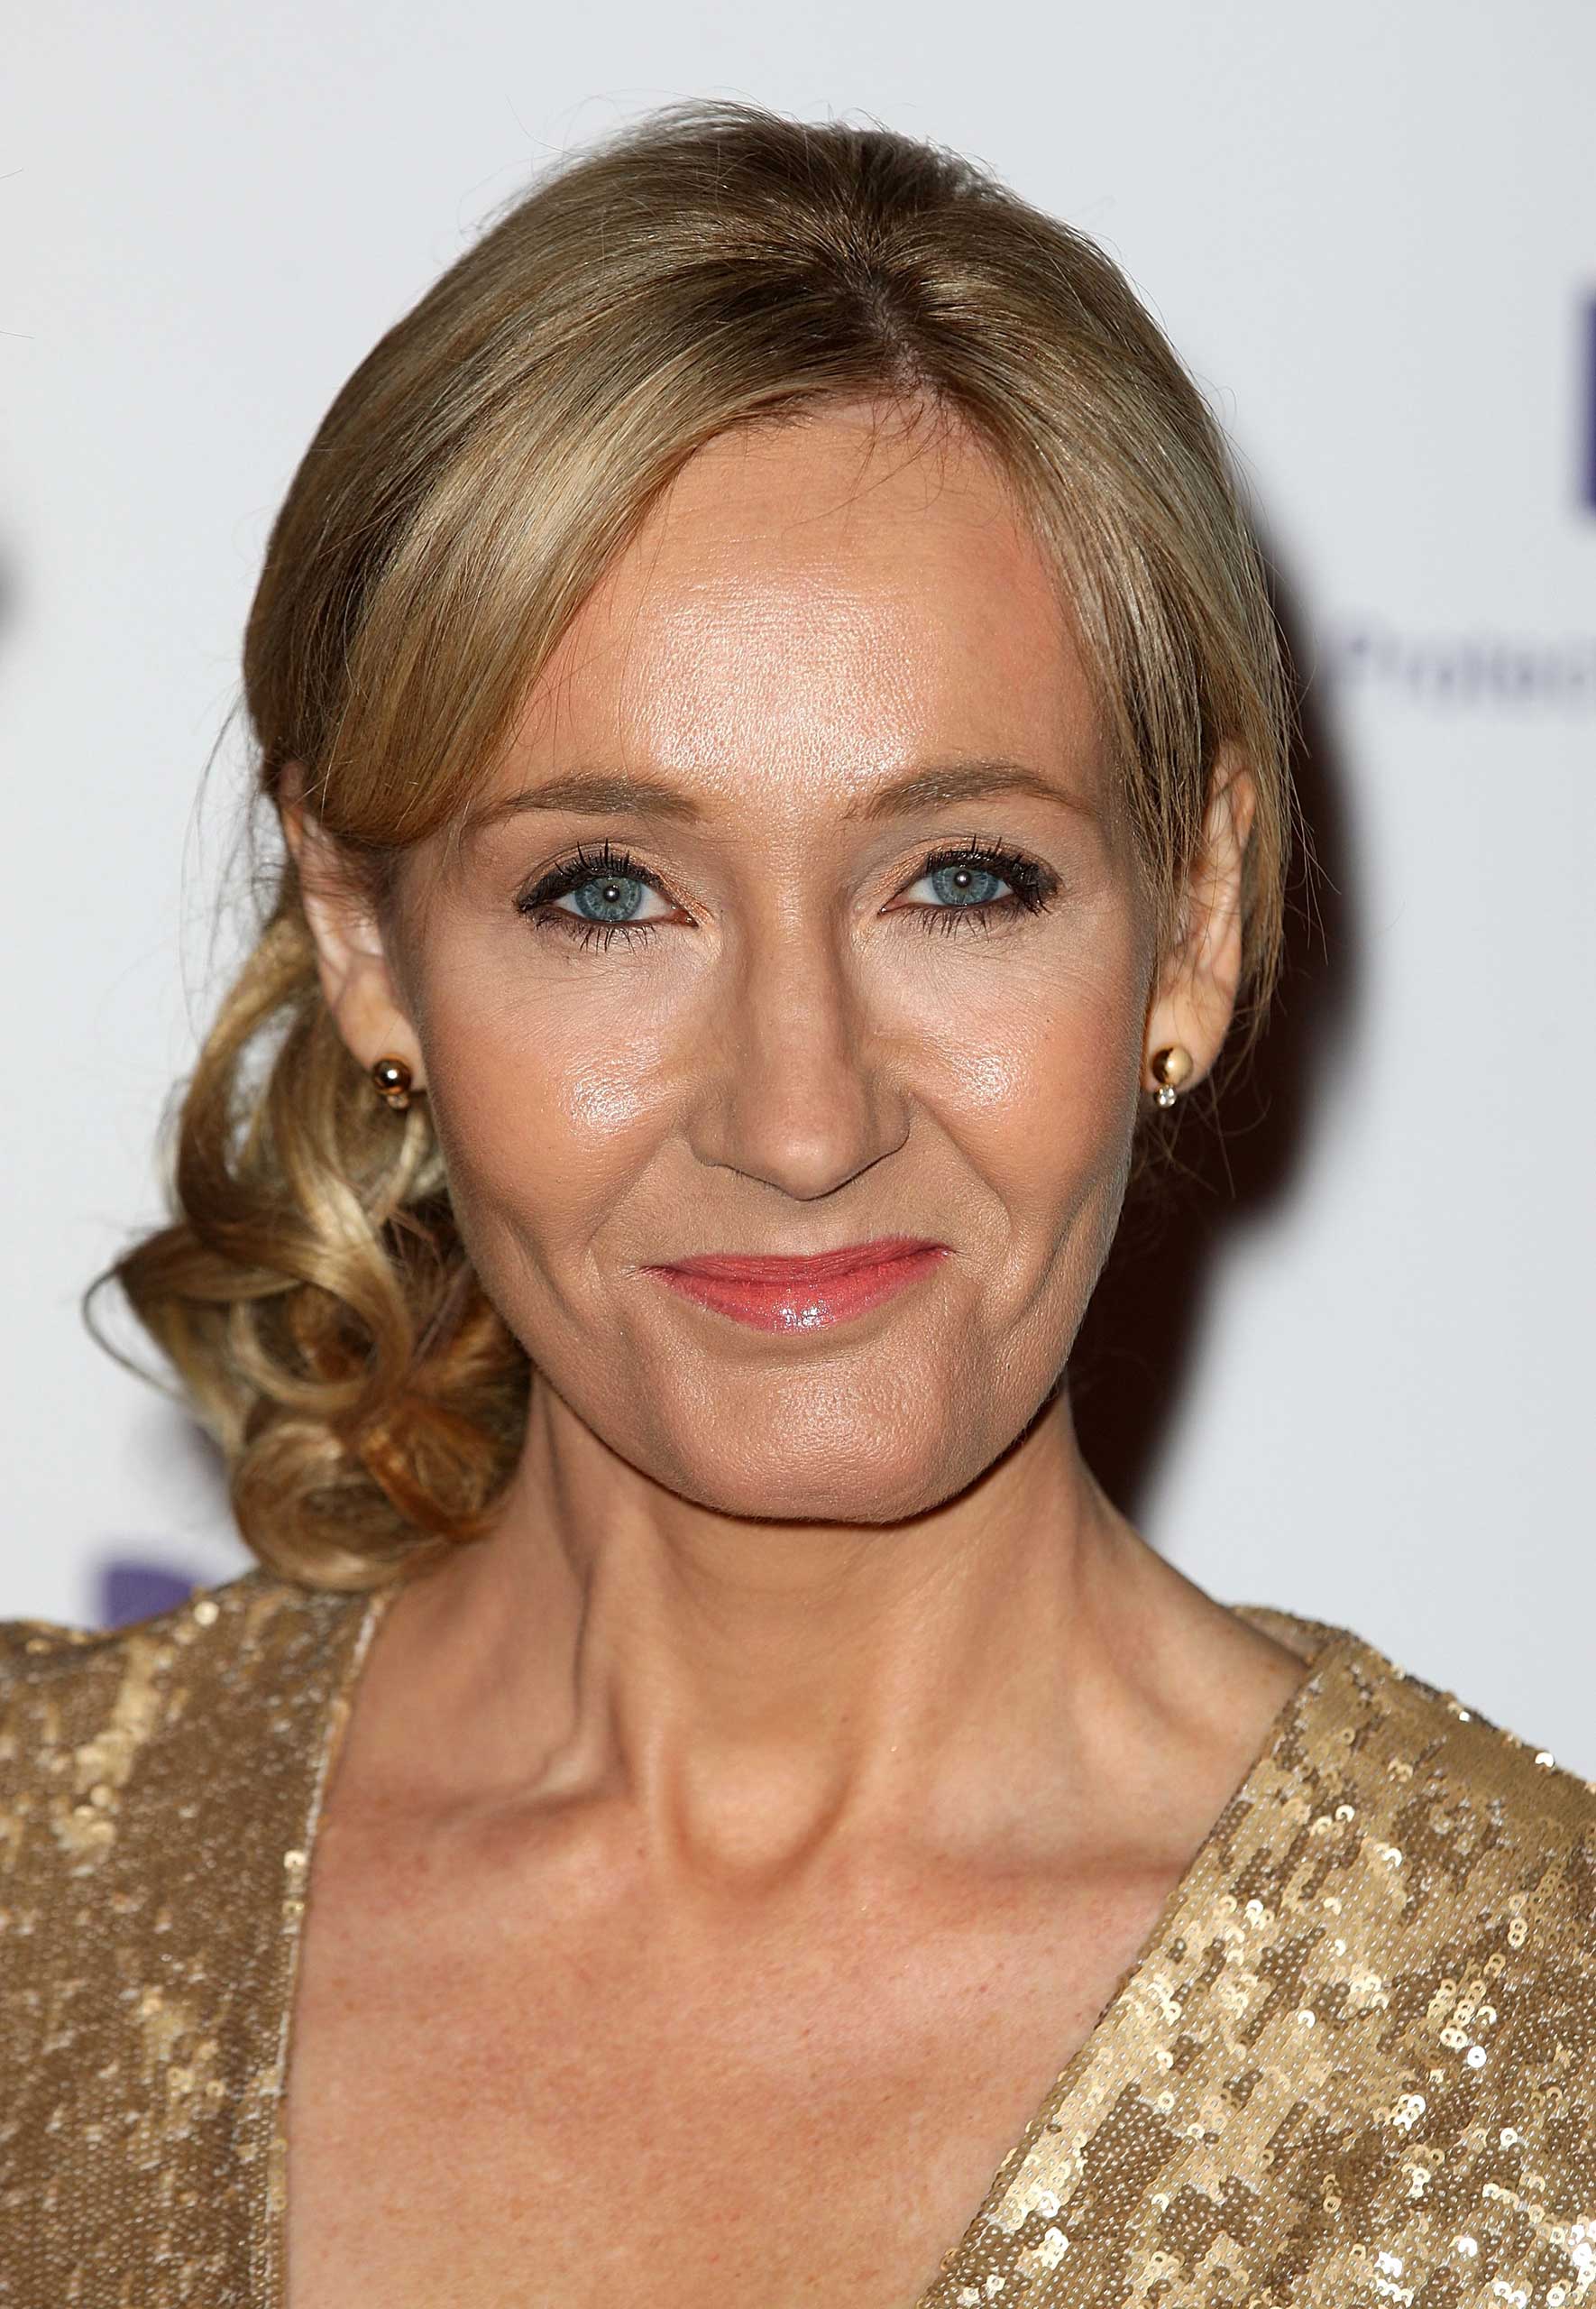 JK Rowling Hosts Fundraising Event For Charity 'Lumos'